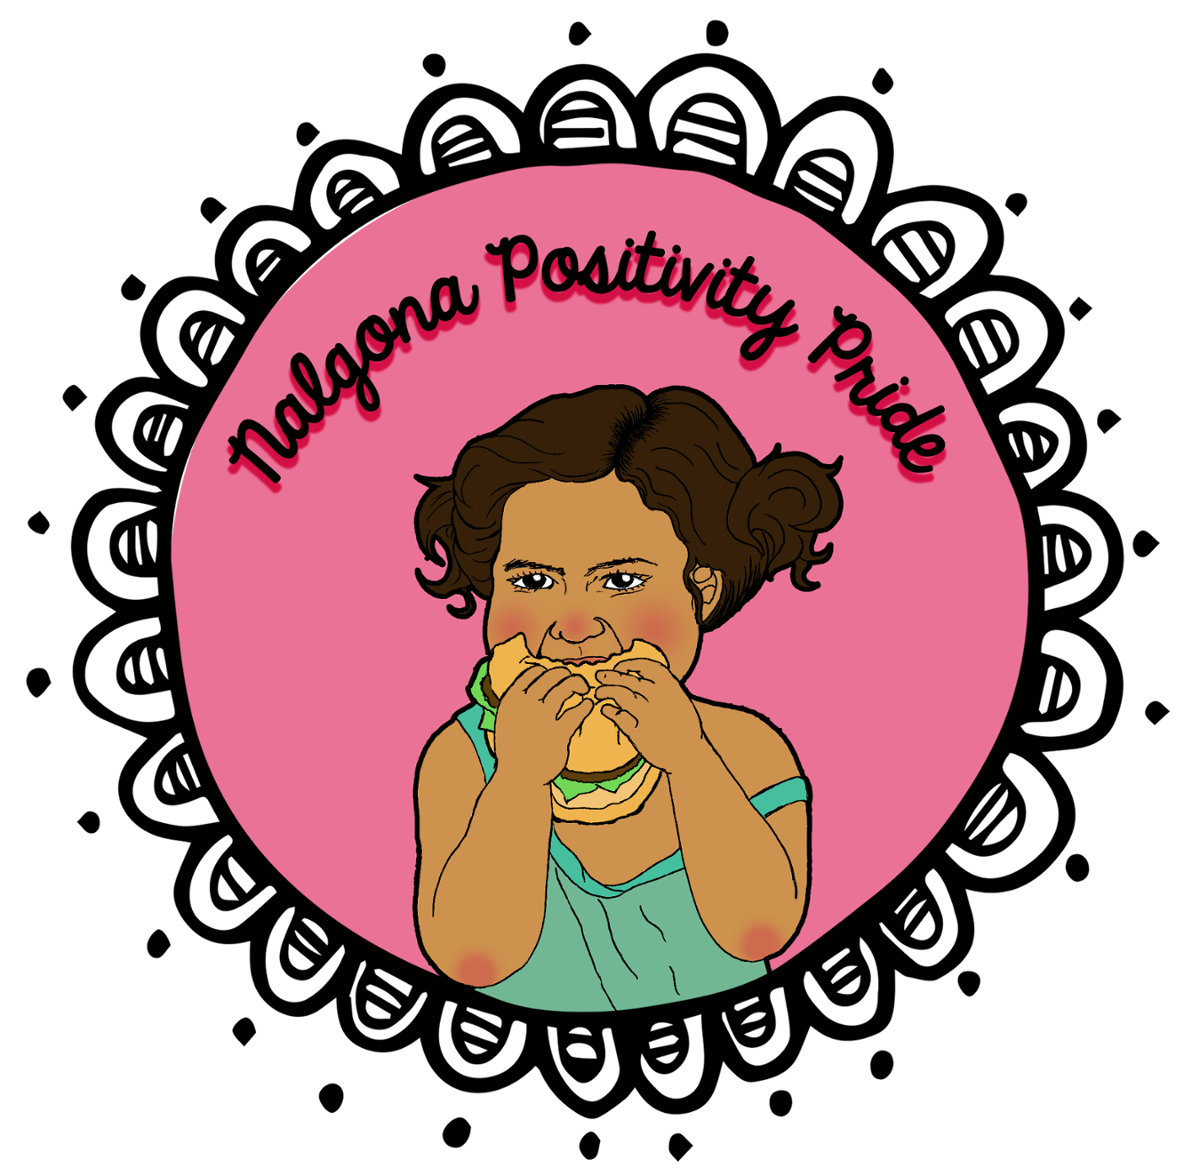 graphic with a pink circle, black line scallop around the edge and a drawing of a girl with brown curly hair and rosey cheeks eating a hamburger 